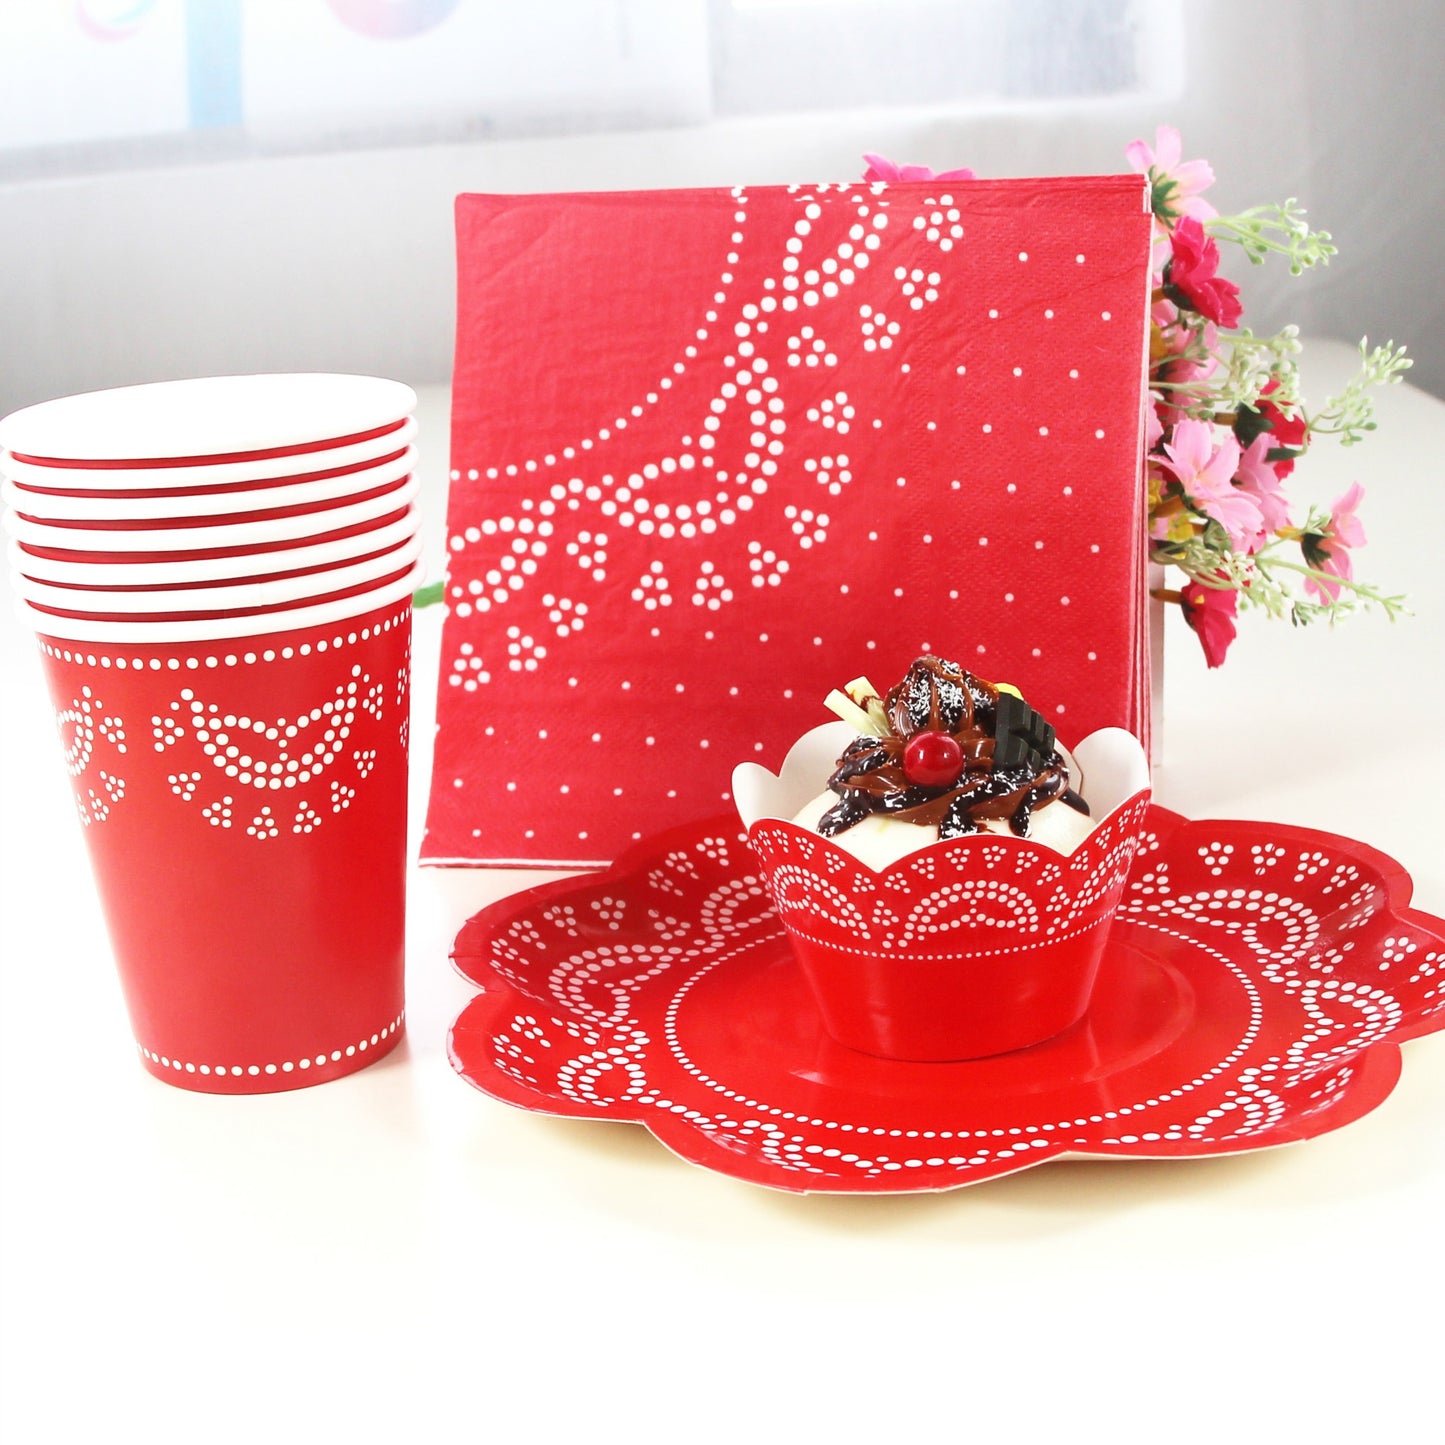 40PCs Lace Pattern Disposable Paper Tableware Set for Birthday Wedding Baby Shower Decoration Paper Plates Cups Napkins Cupcake Party Supplies